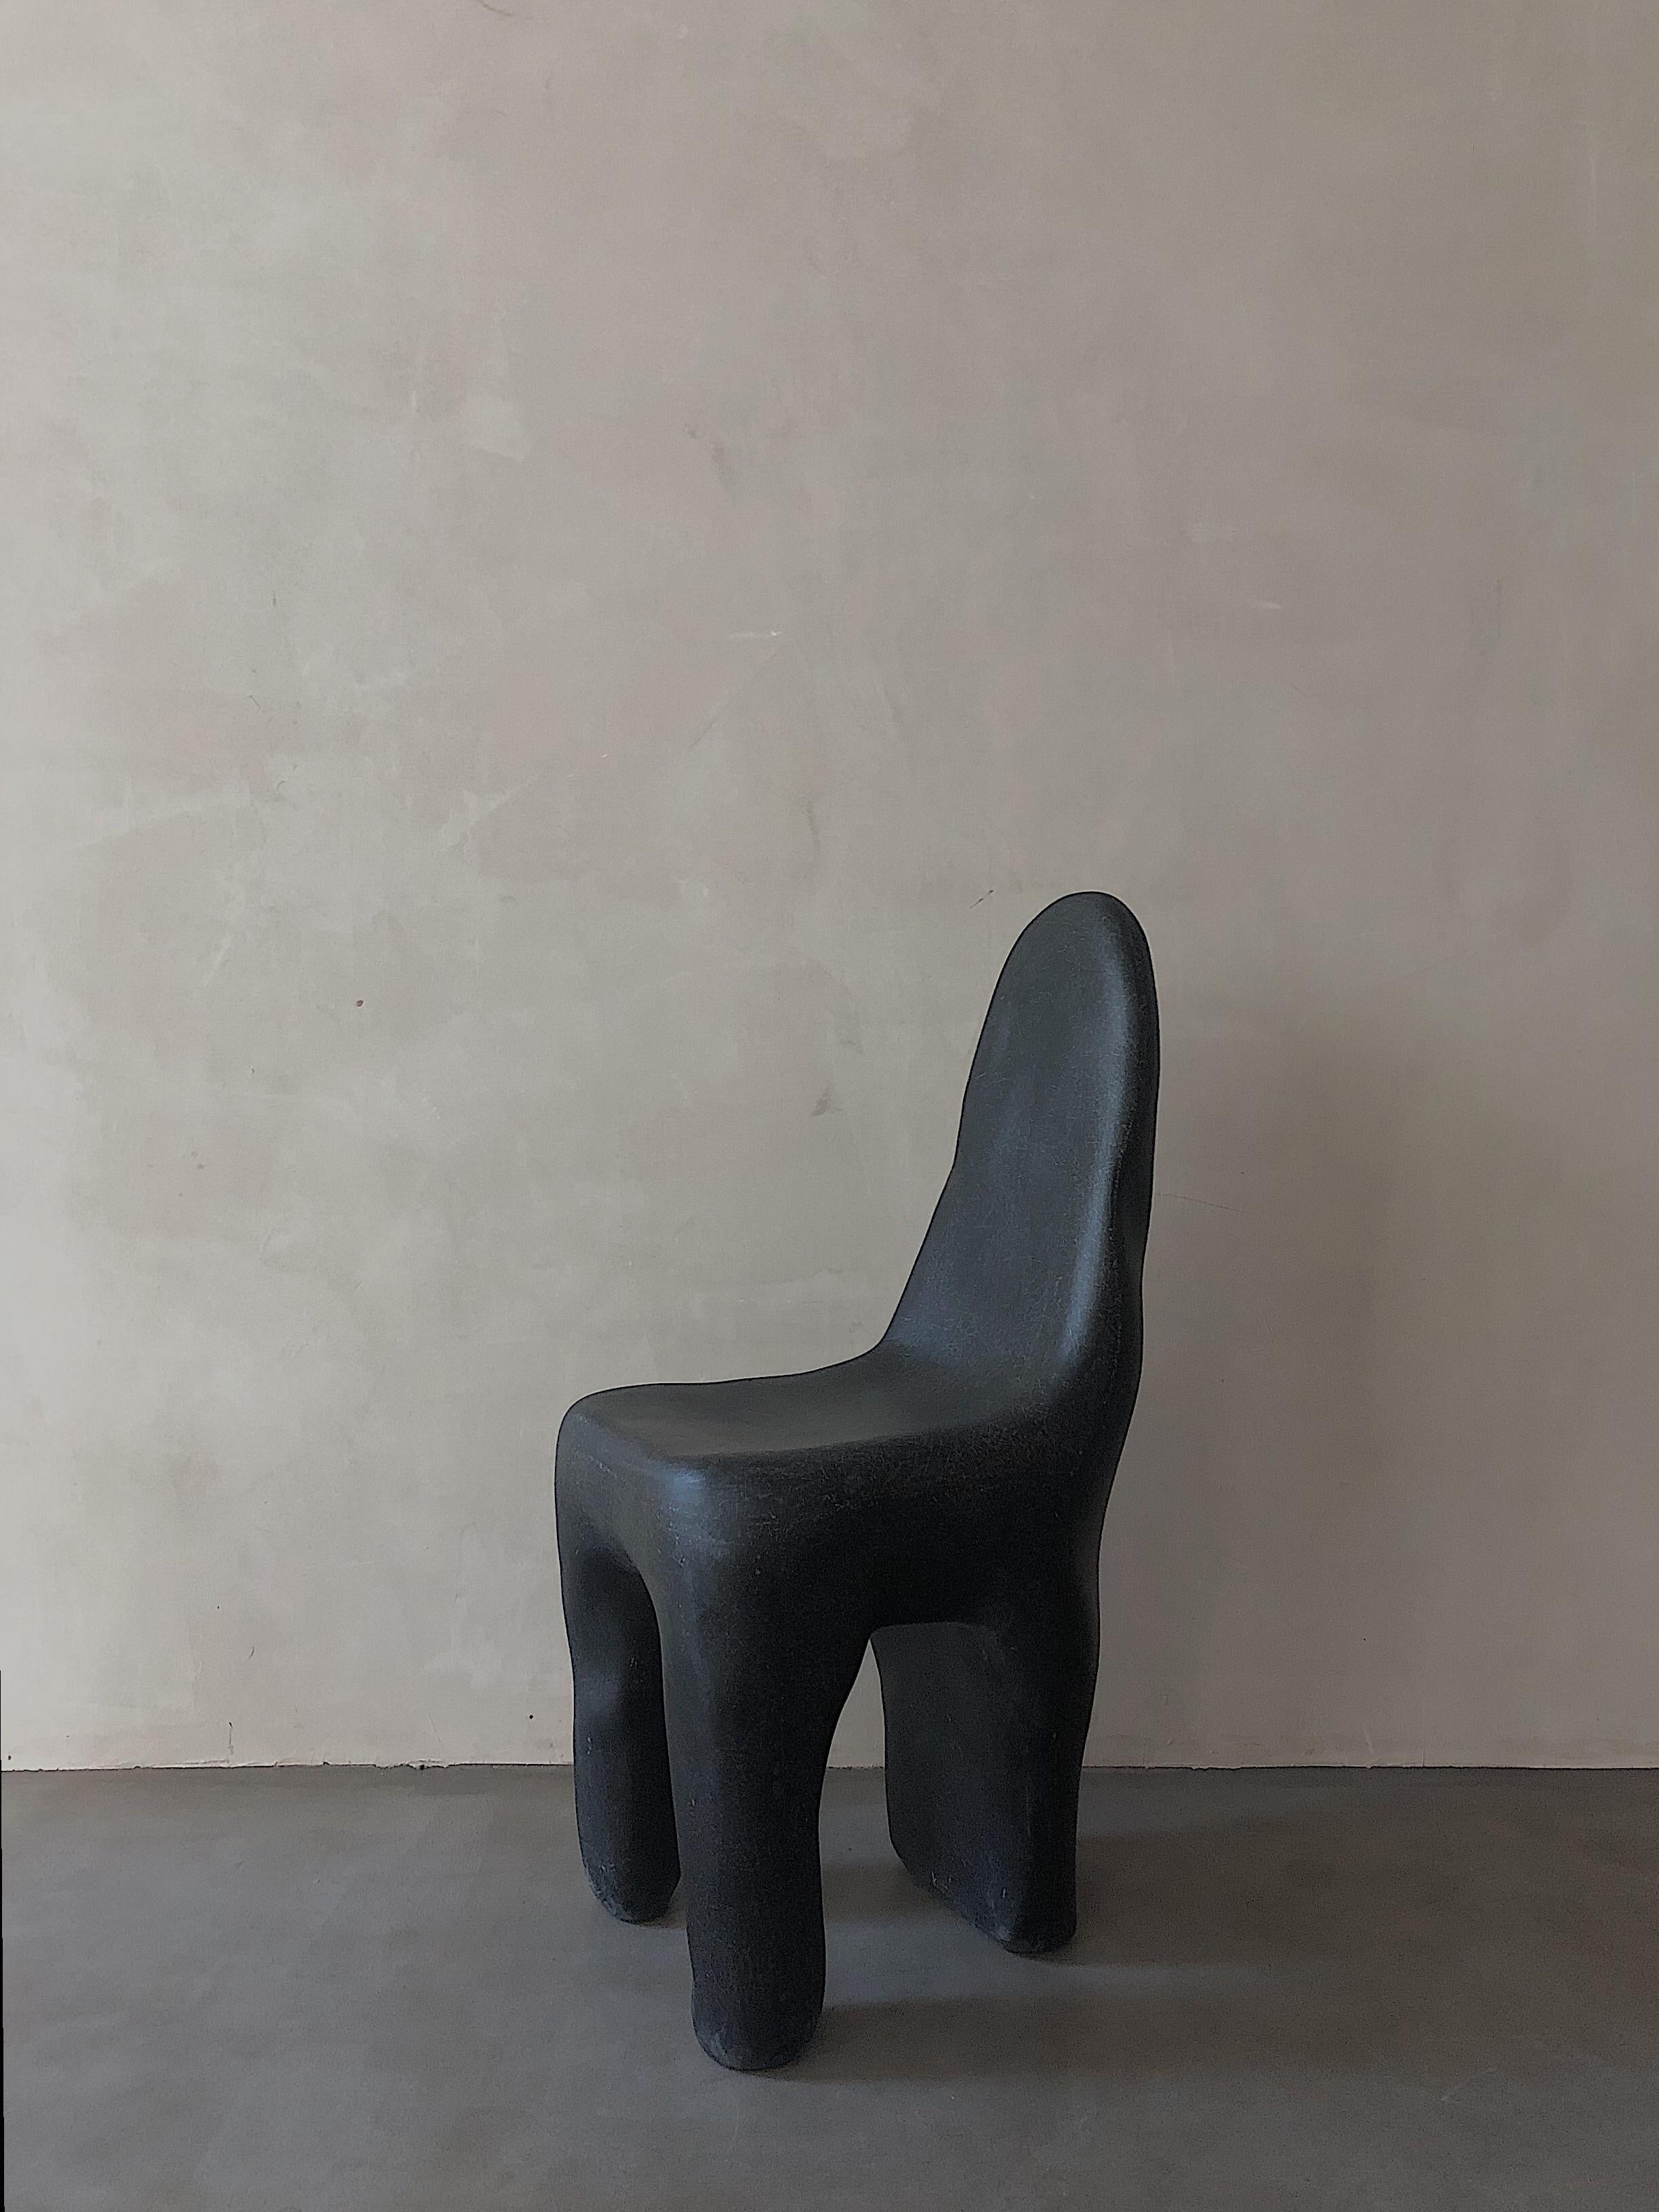 Chinese Black Playdough Chair by kar For Sale